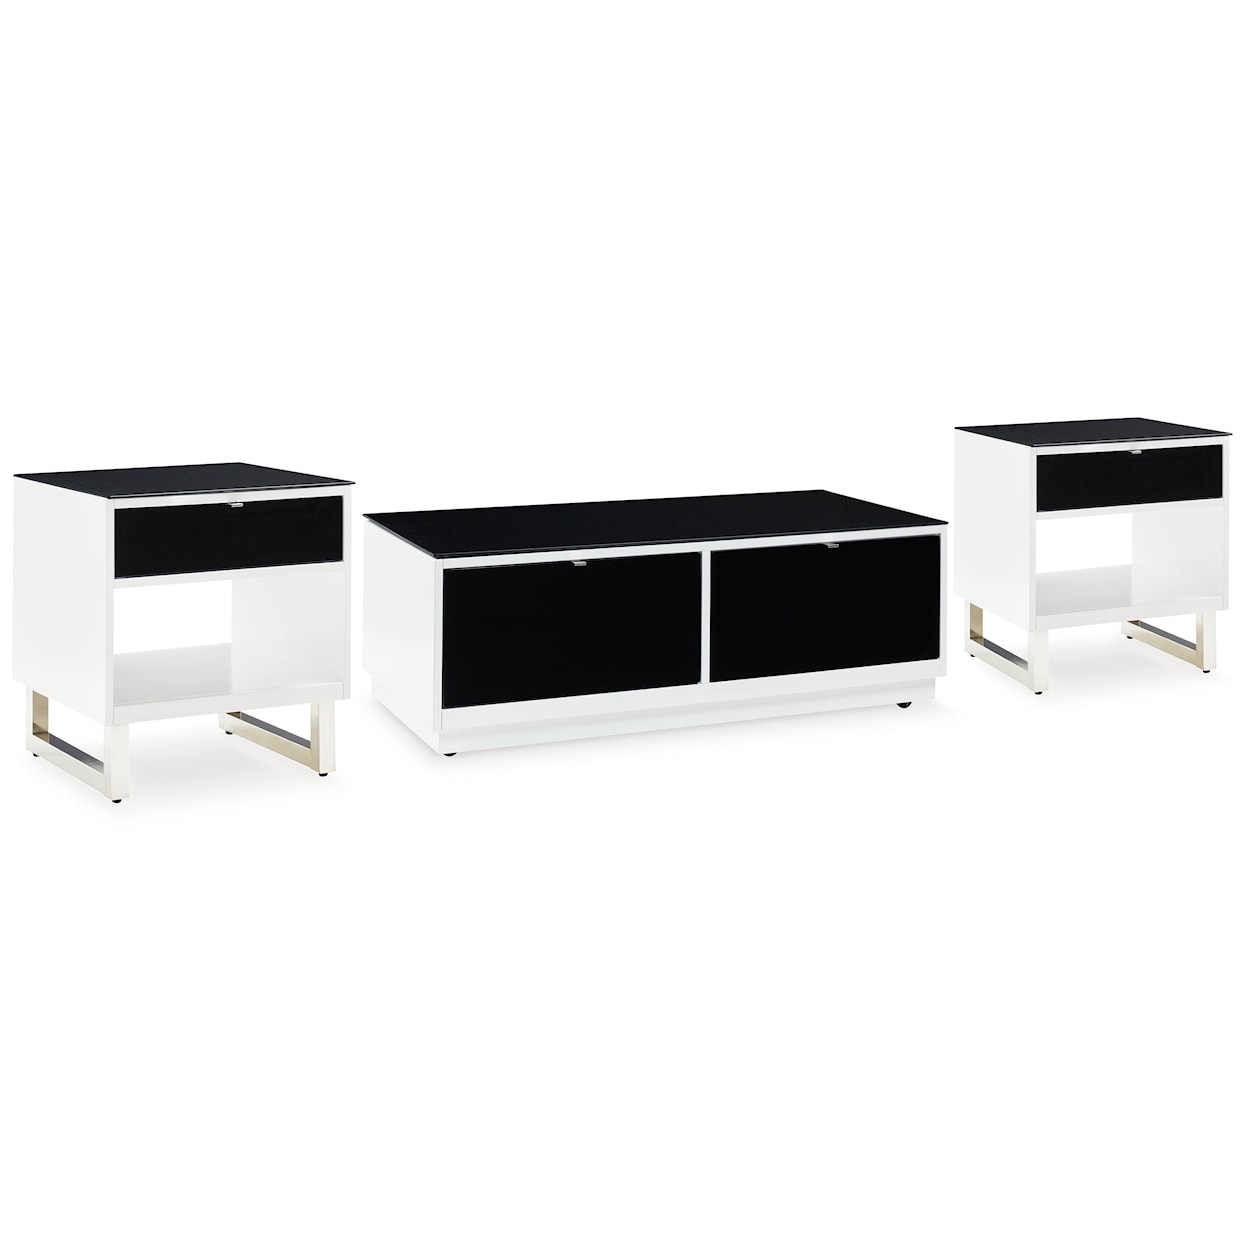 Signature Design by Ashley Furniture Gardoni Coffee Table and 2 End Tables